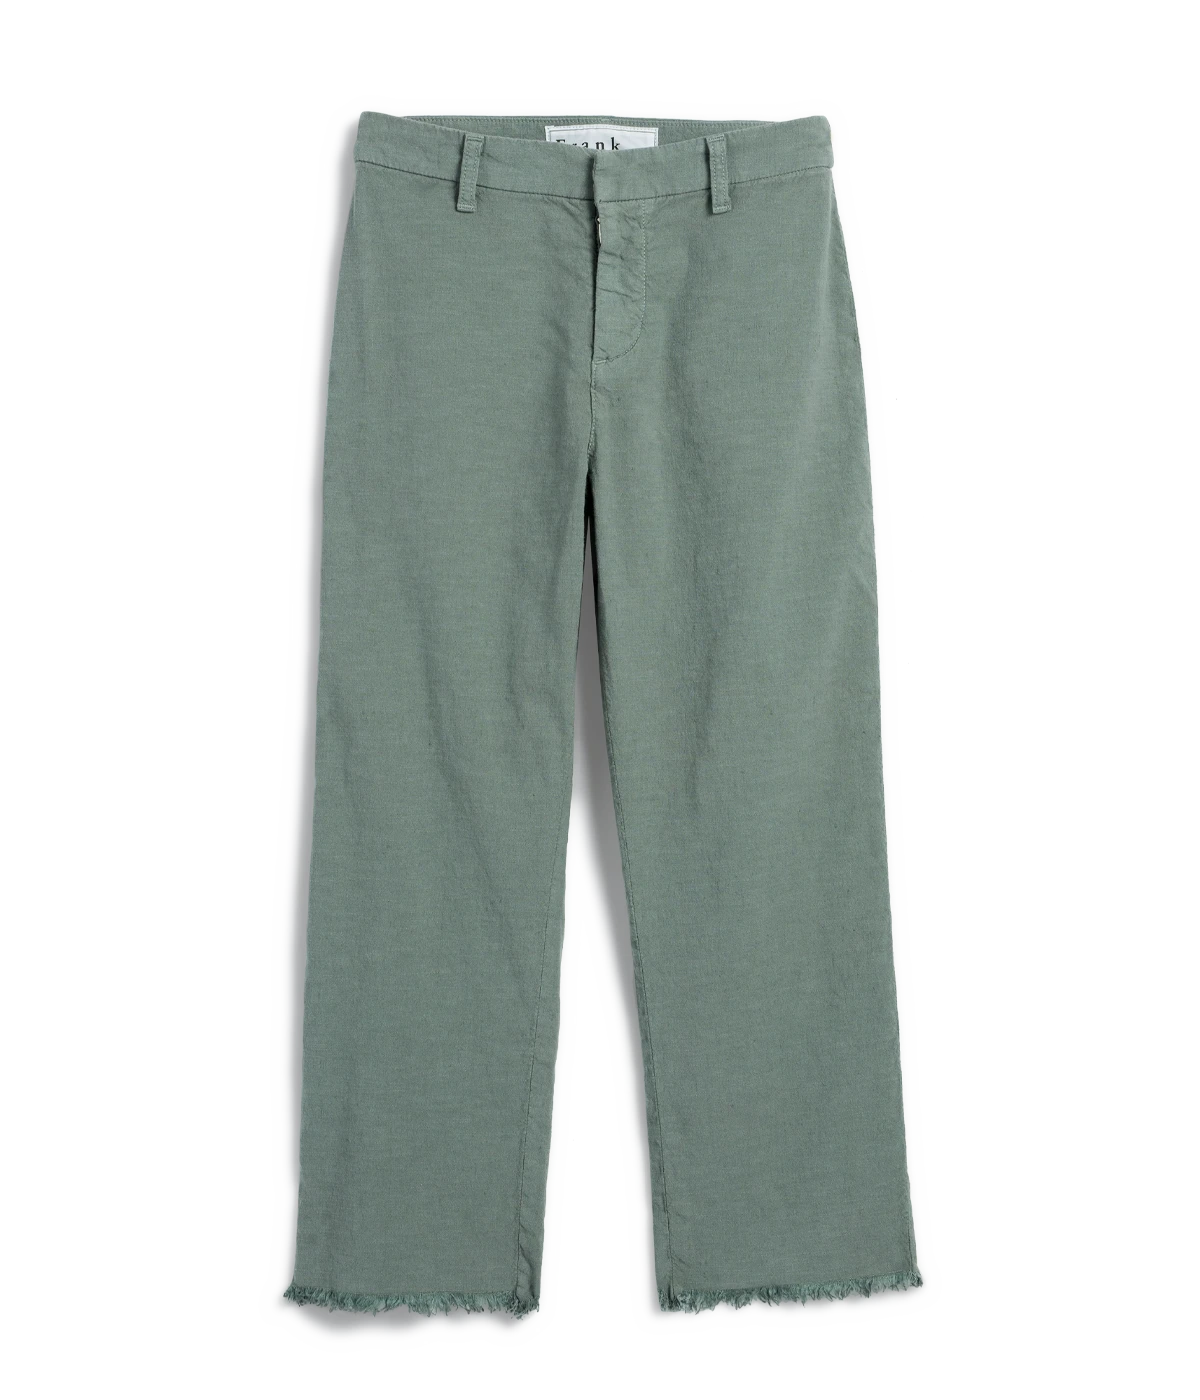 Kinsale Performance Pant in Rosemary